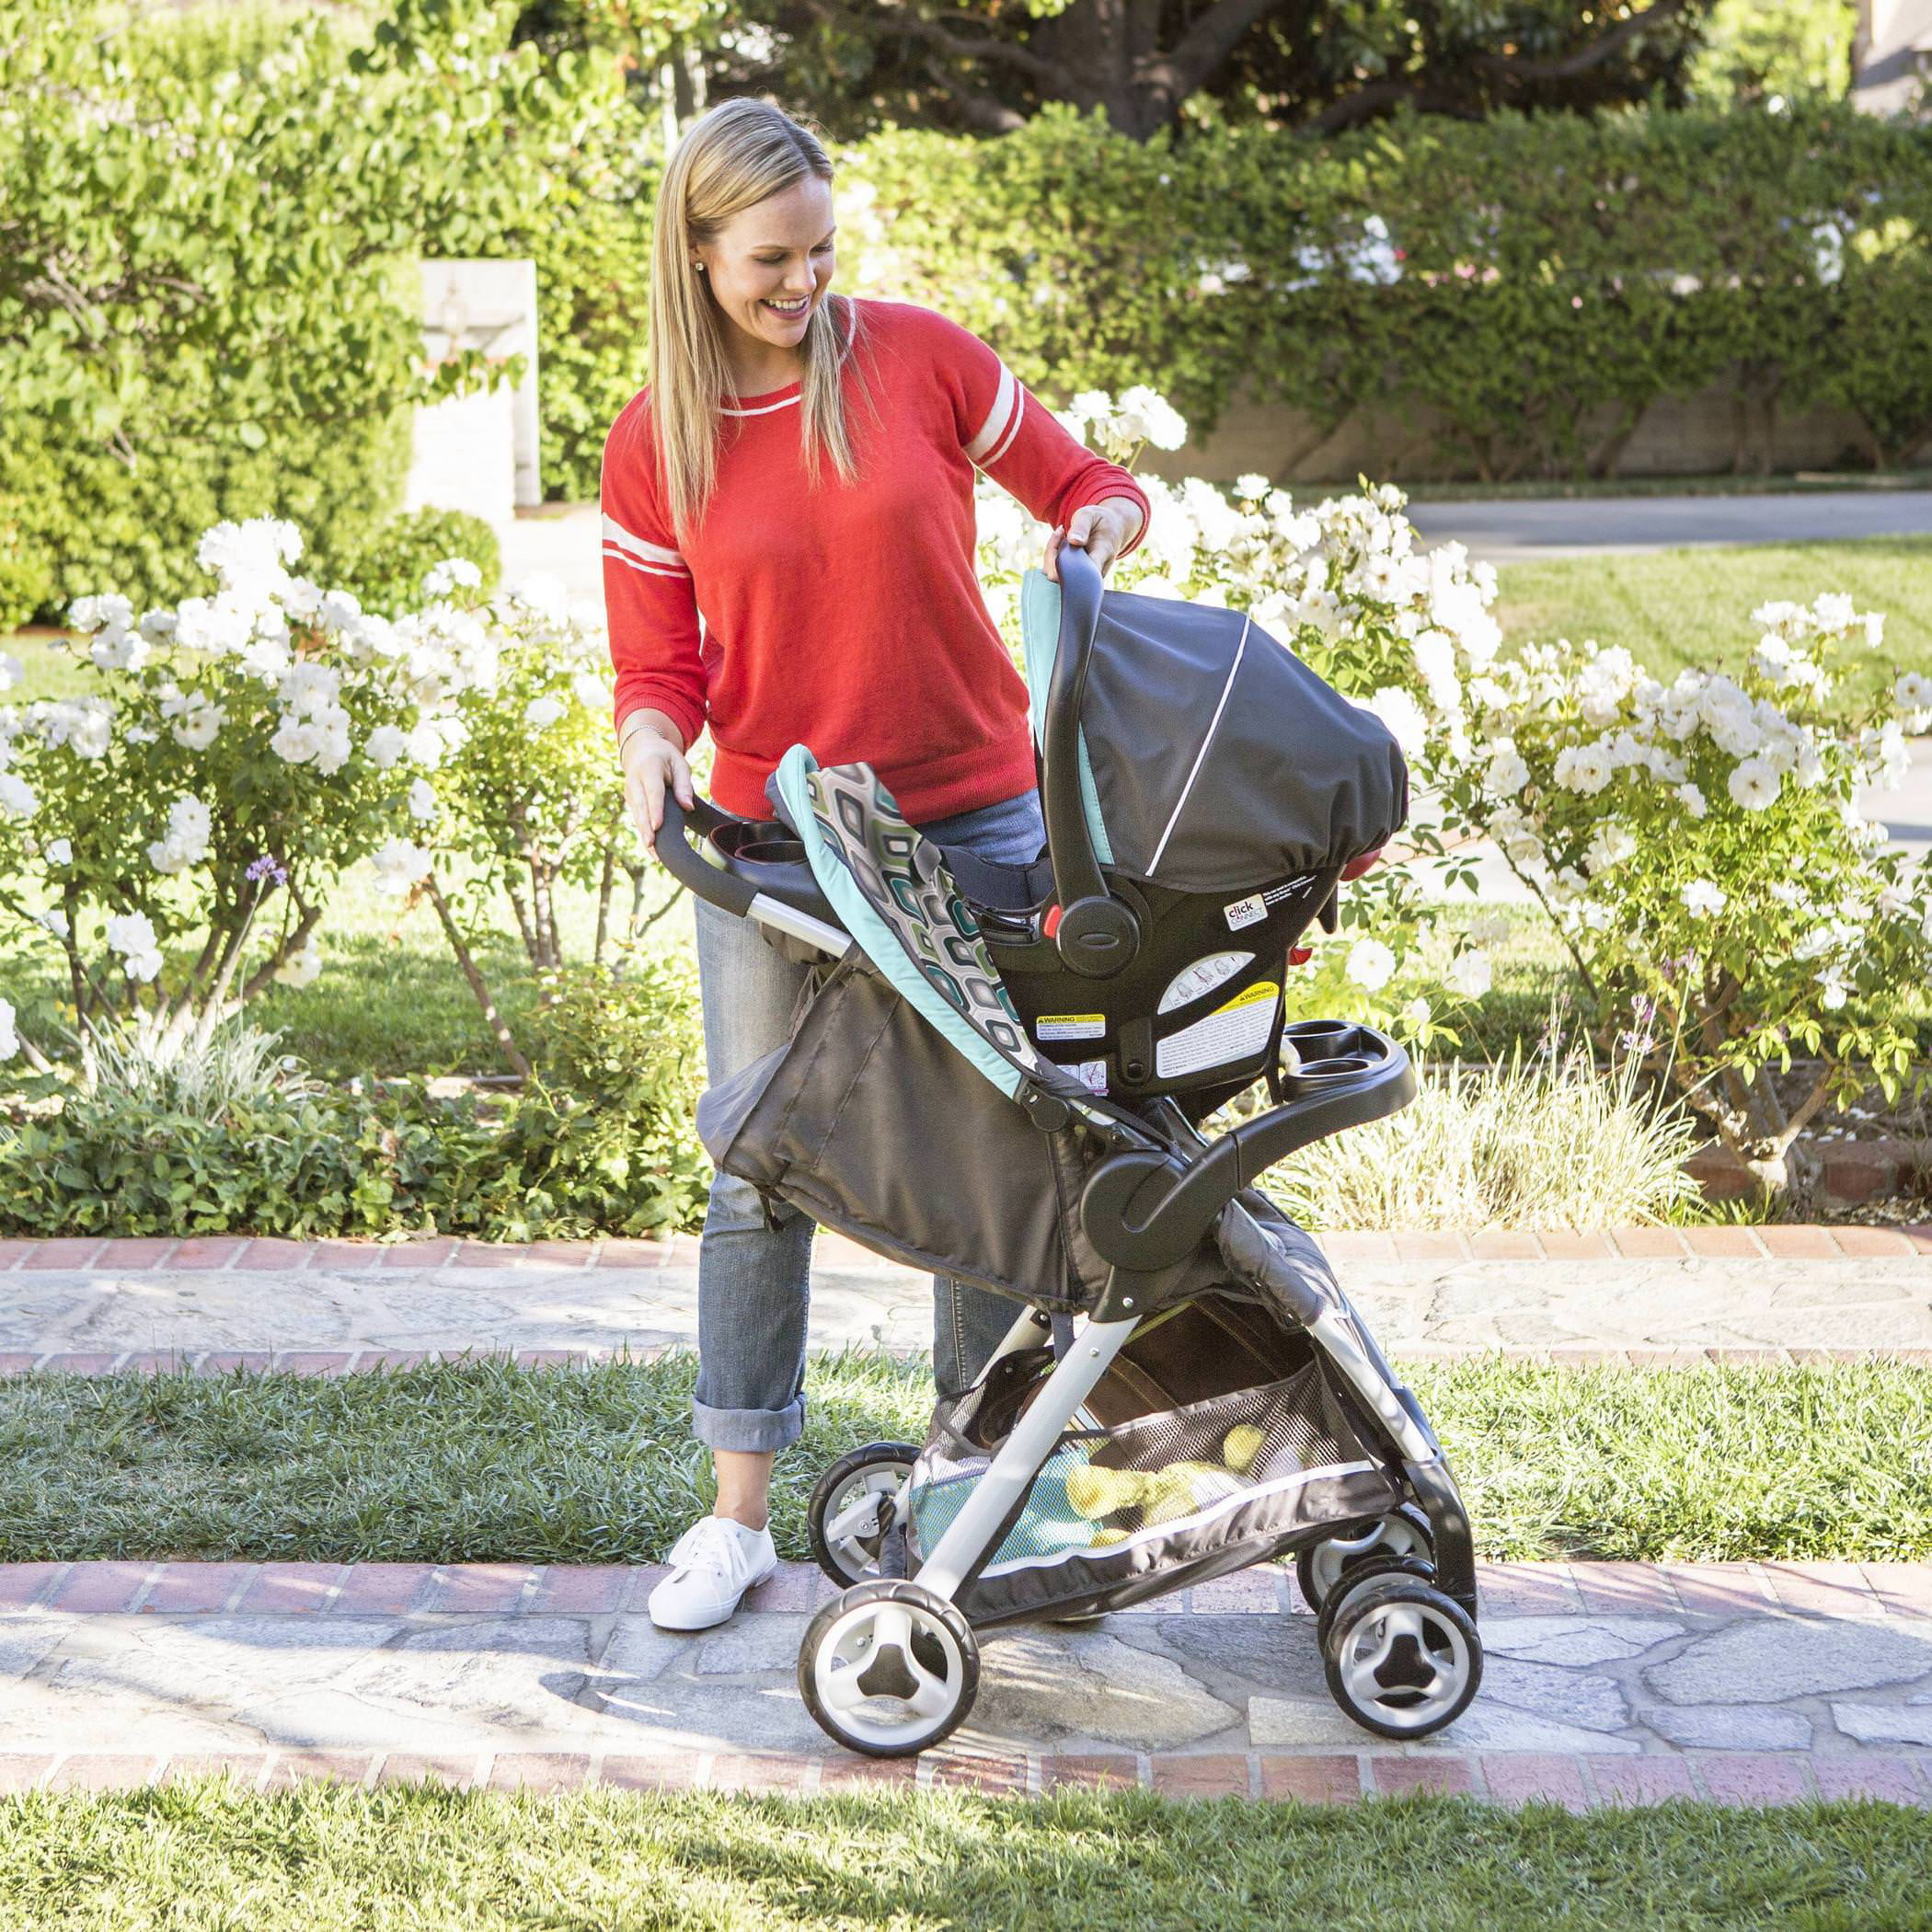 graco finley travel system